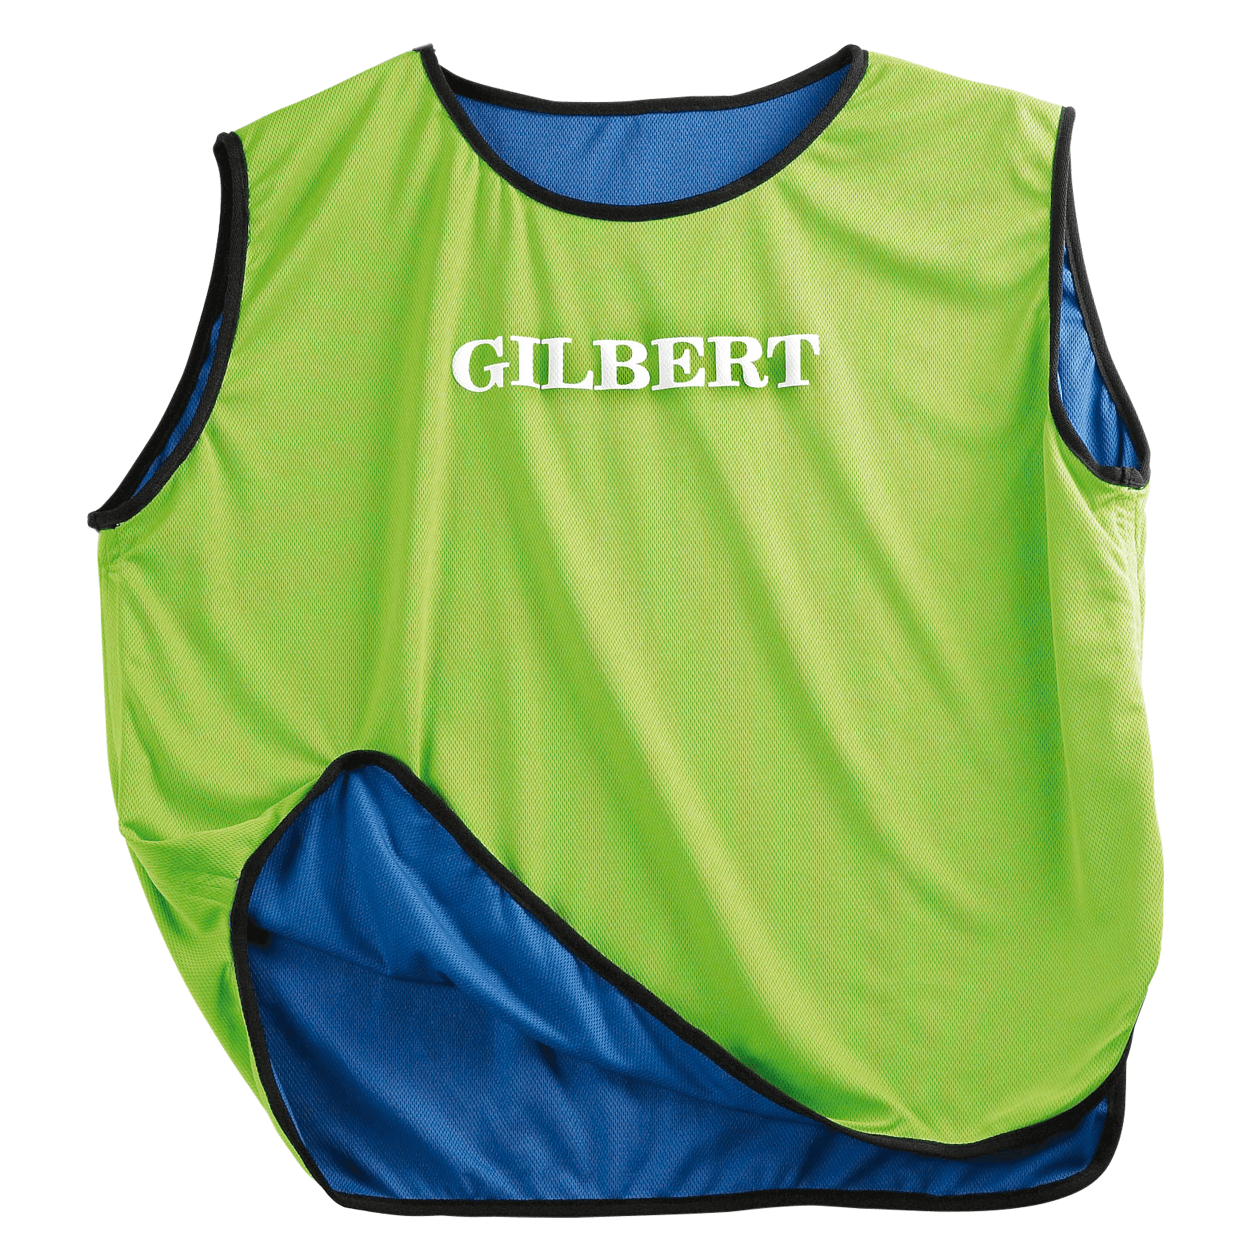 Rugby Imports Gilbert Reversible Rugby Training Bib